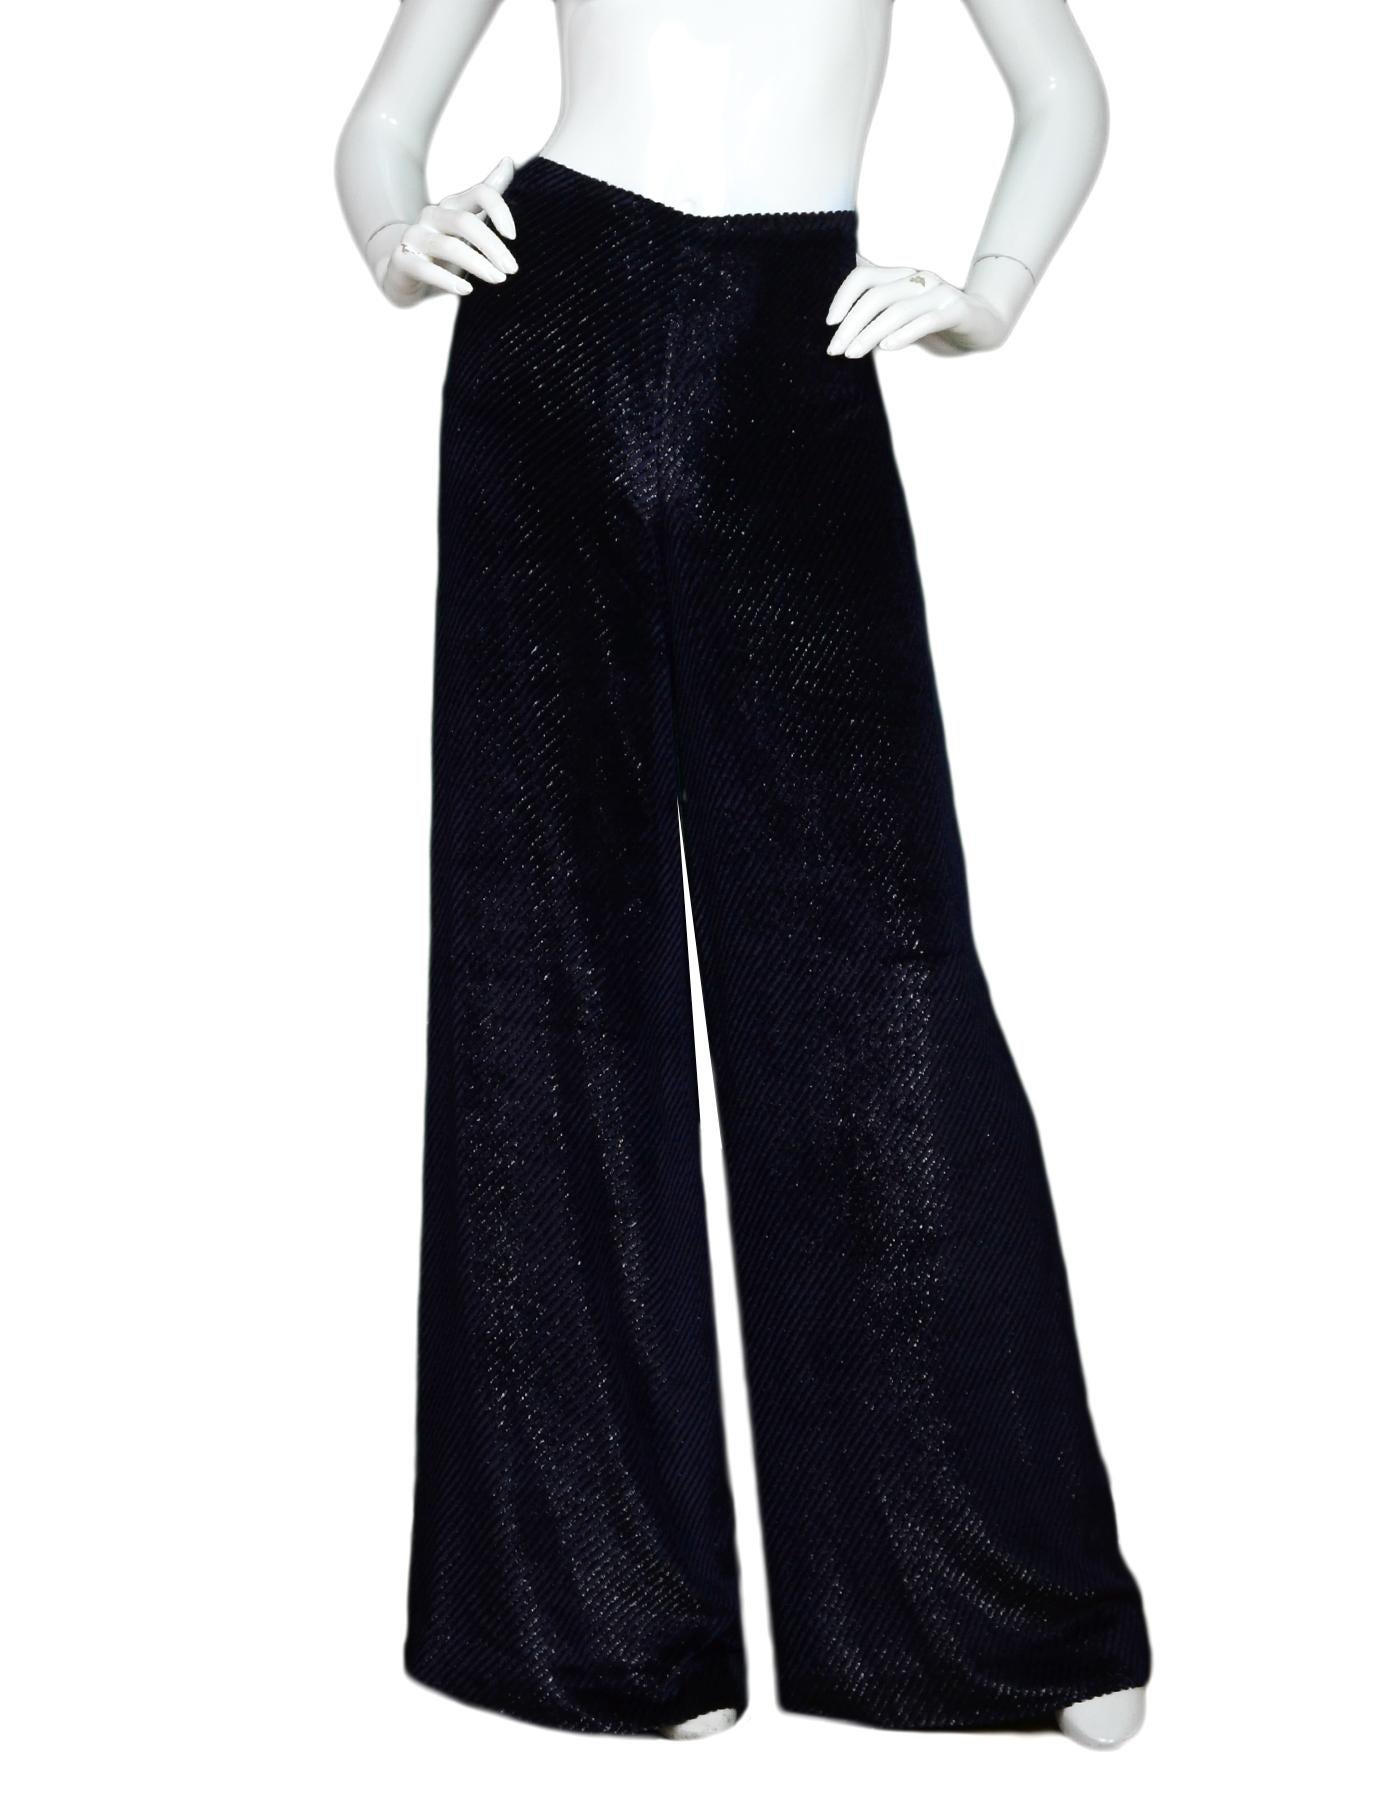 Ralph Lauren Purple Label Navy Wide Leg Velvet Sparkle Pants Sz 2

Made In: USA
Color: Navy/black
Materials: 50% viscose, 35% silk, 15% polyester 
Lining:  100% silk
Closure/Opening: Hidden side zipper with hook eye at top
Overall Condition: